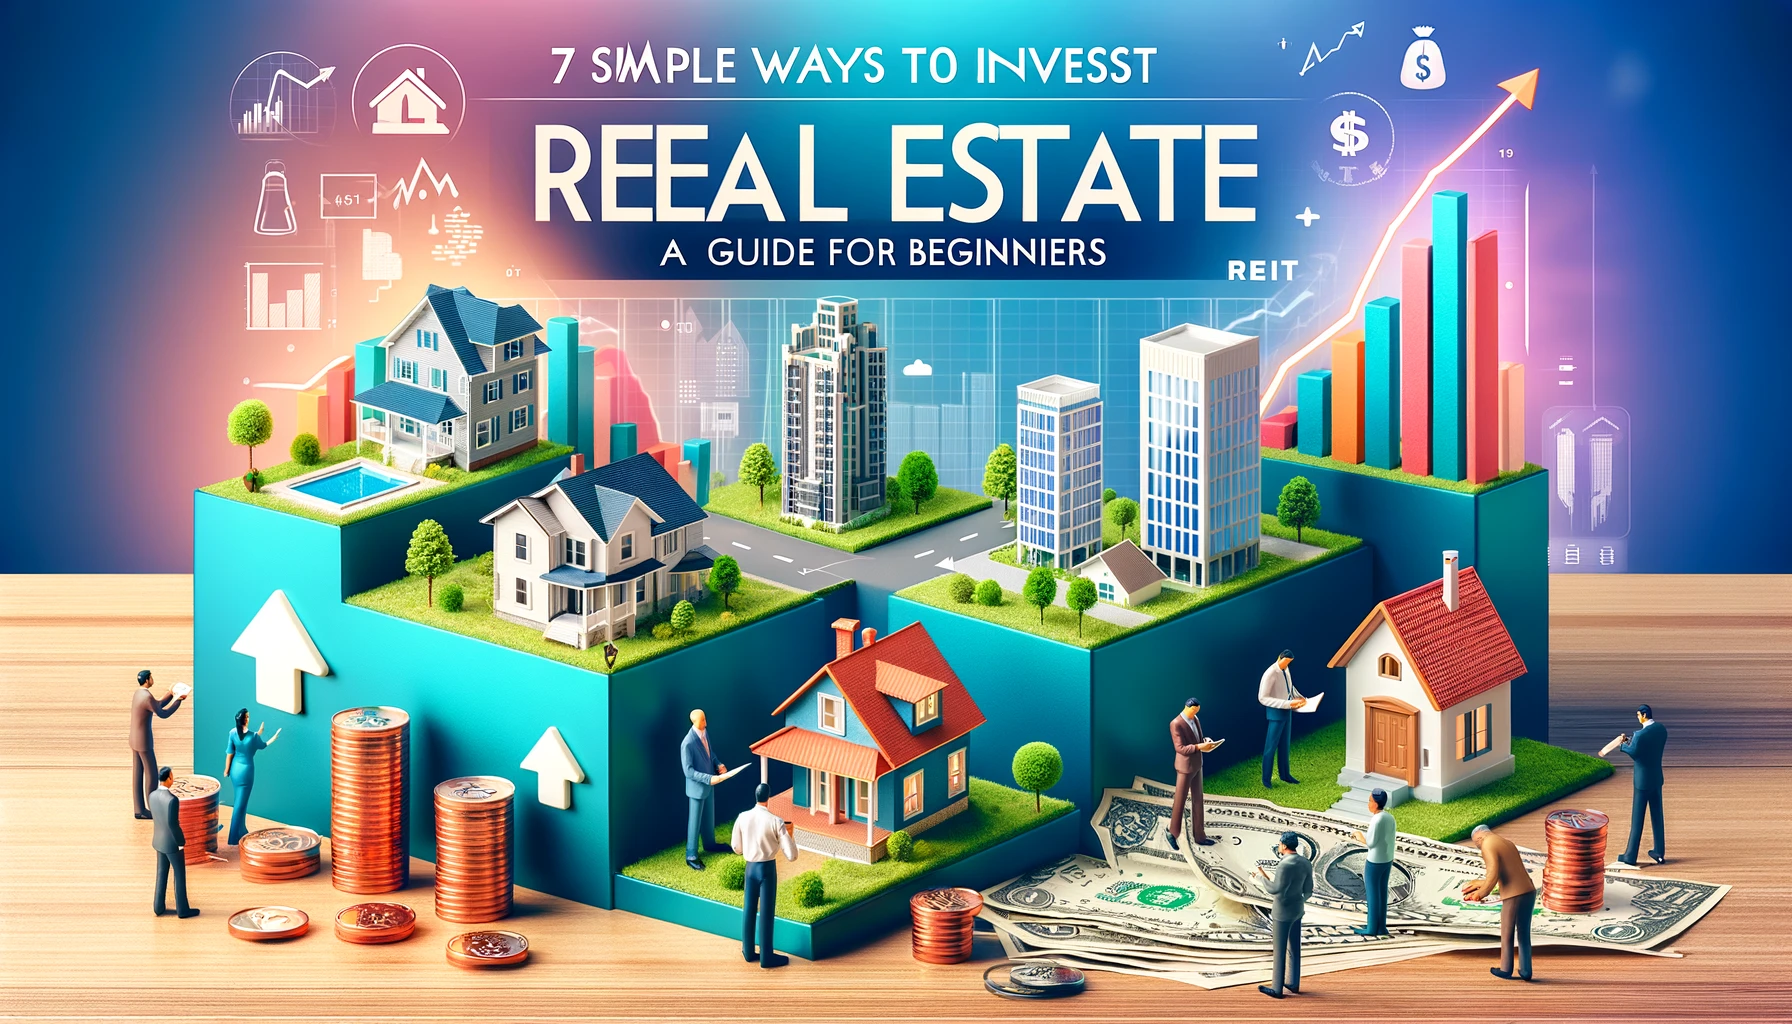 7 Simple Ways to Invest in Real Estate: A Guide for Beginners